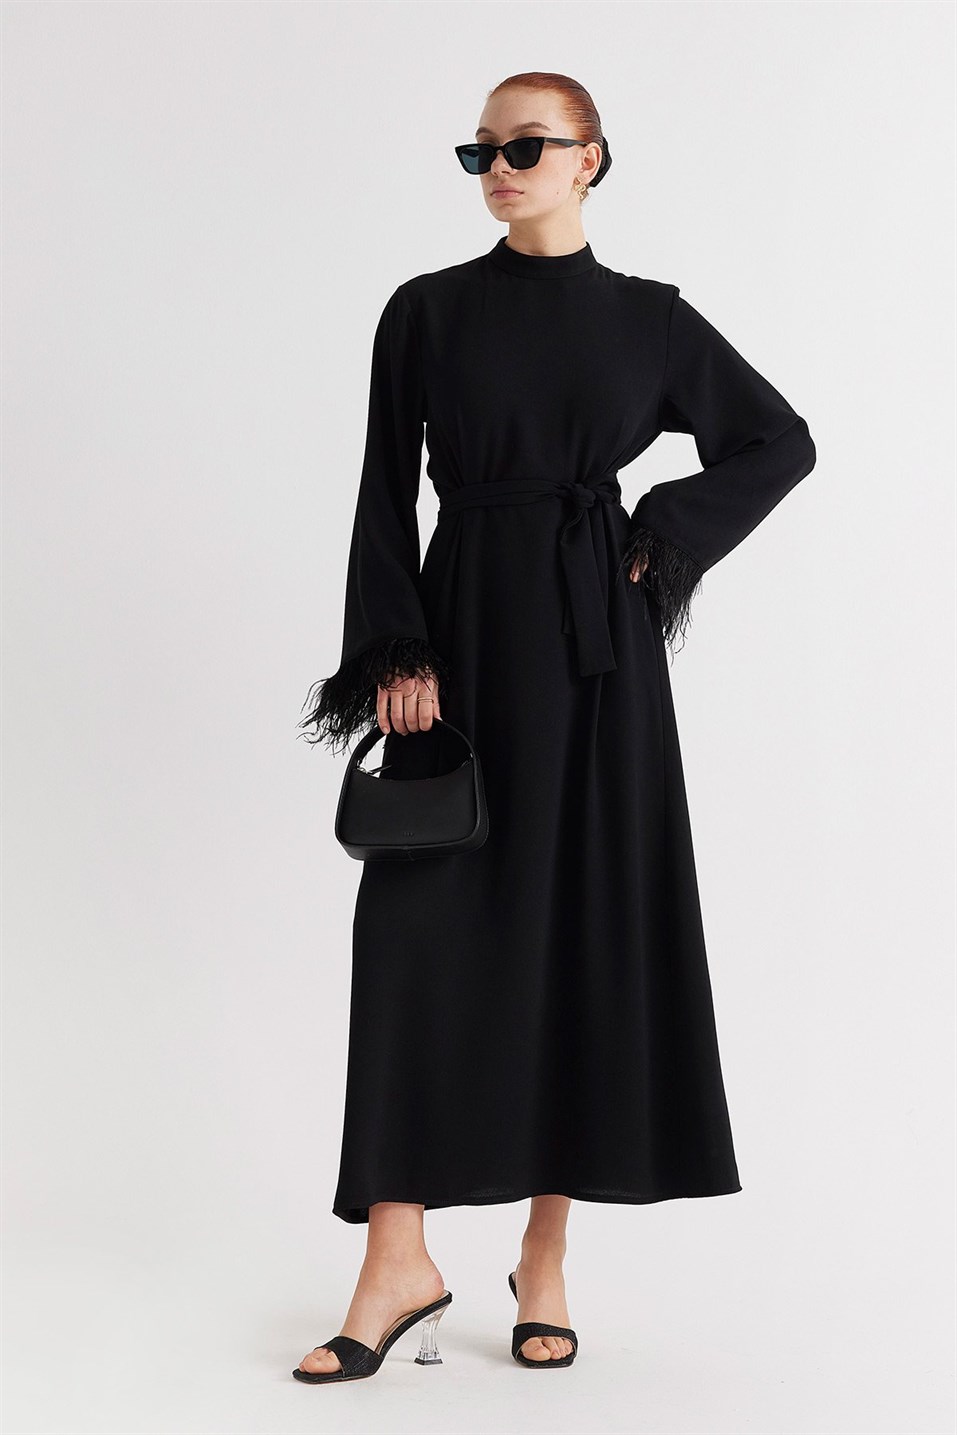 Black Feathered Sleeved Evening Dress 